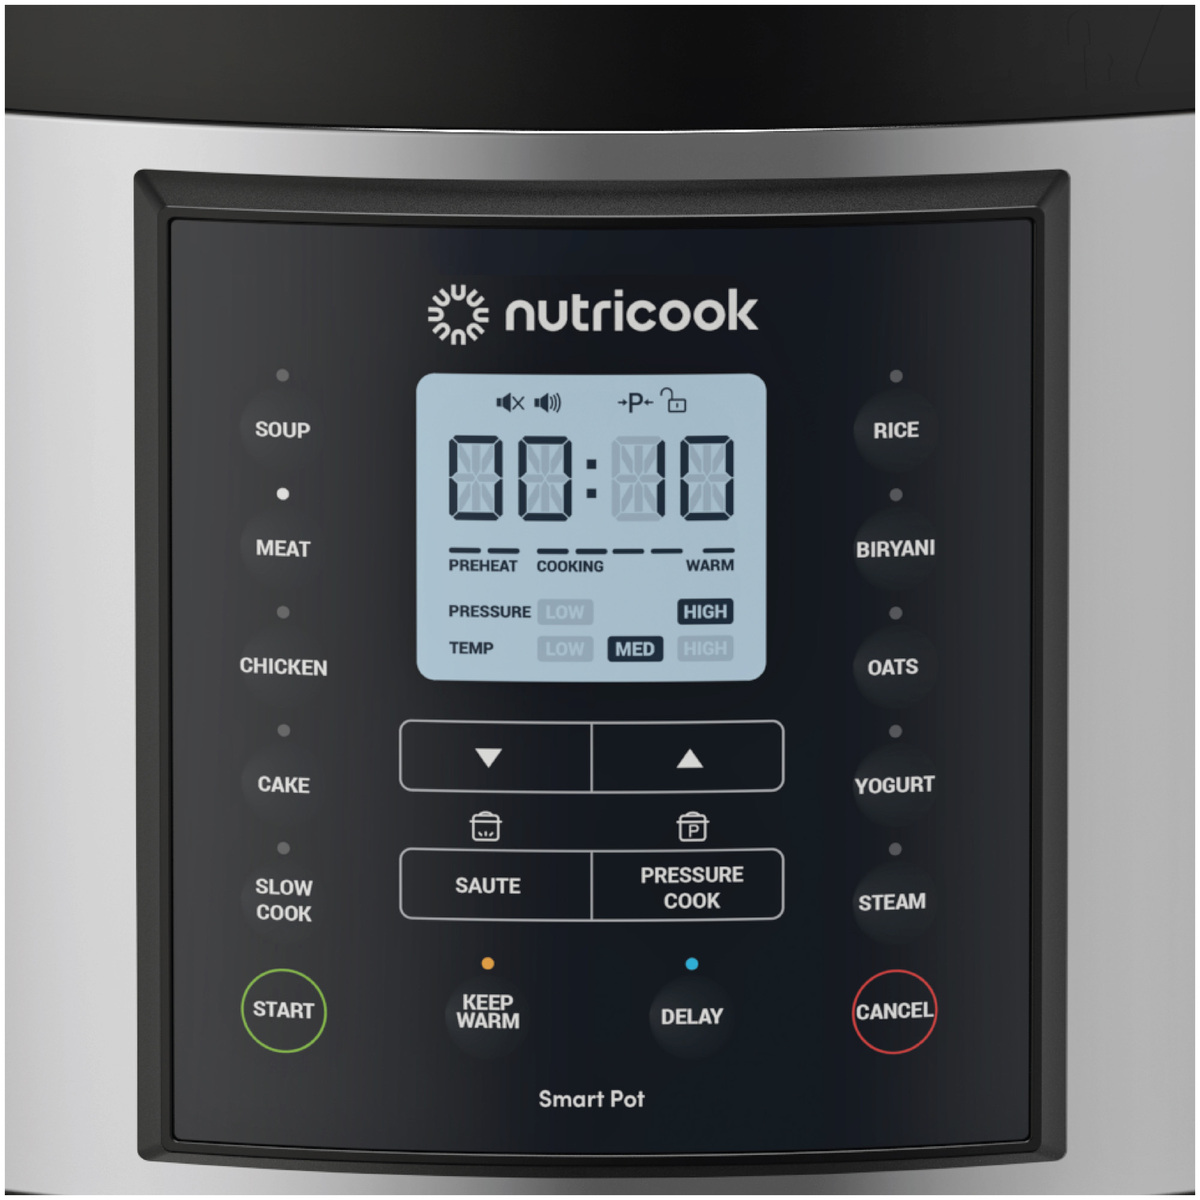 Nutricook Smart Pot 2 Plus, 9 in 1 Electric Pressure Cooker, 9.5 L, 1500 W, Stainless Steel/Black, NC-SP210L